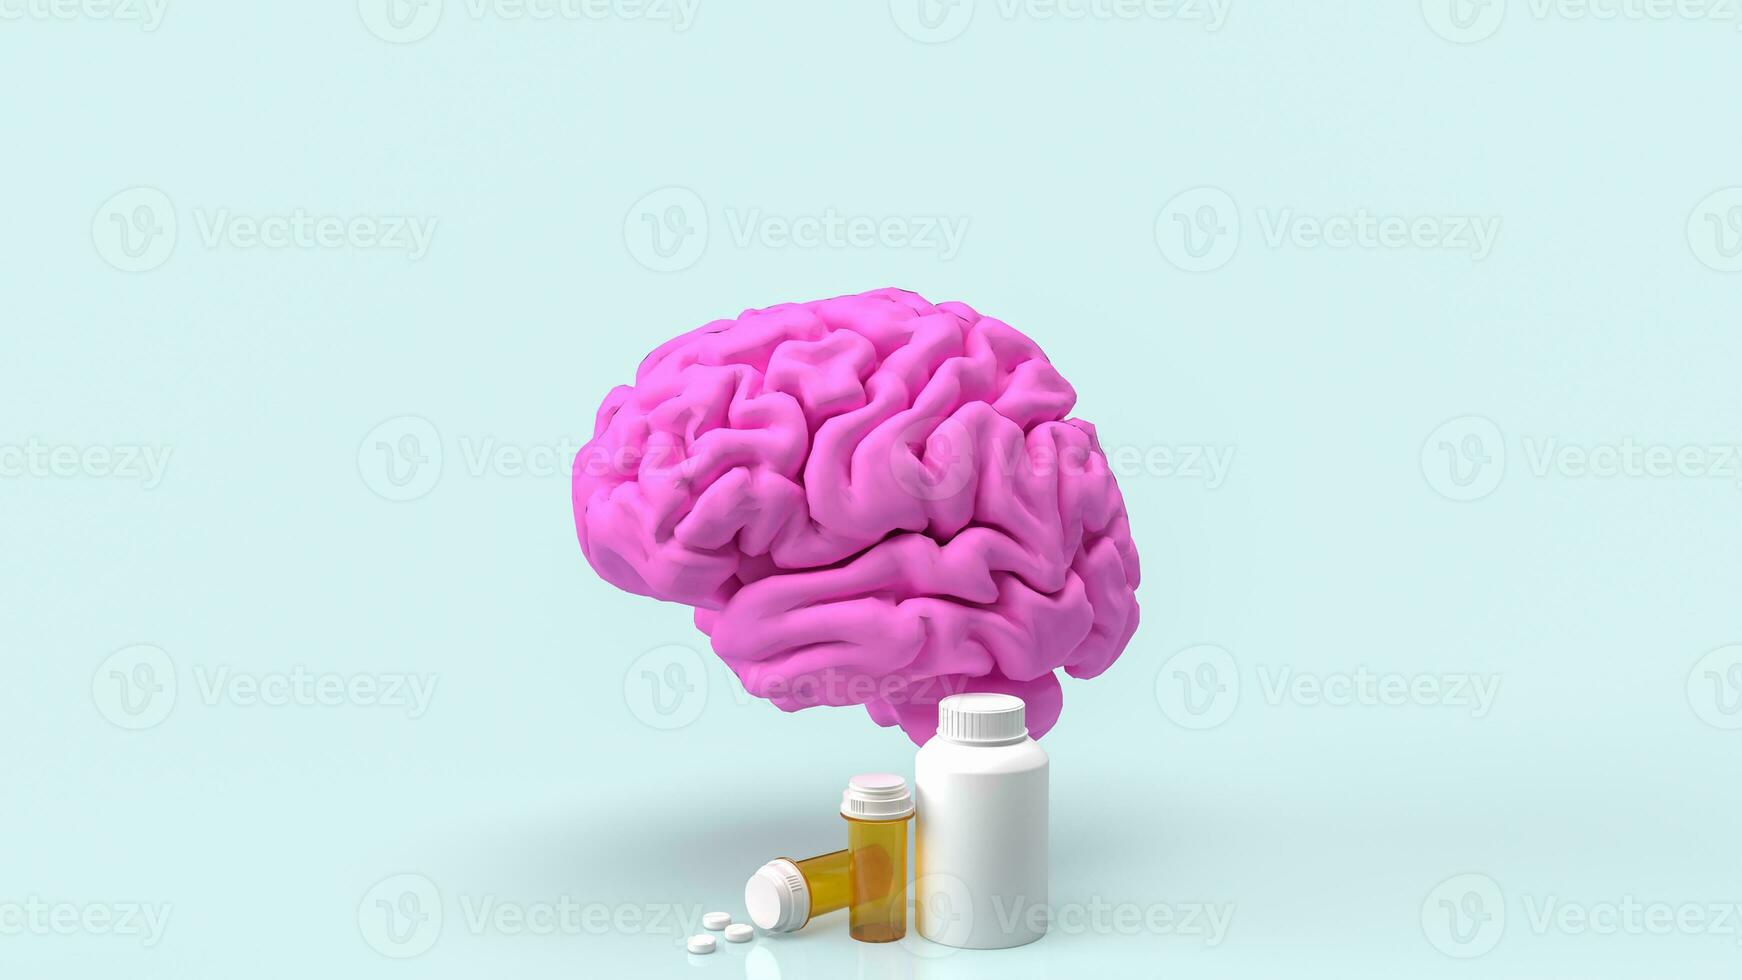 The Brain and drug for sci or medical concept 3d rendering photo